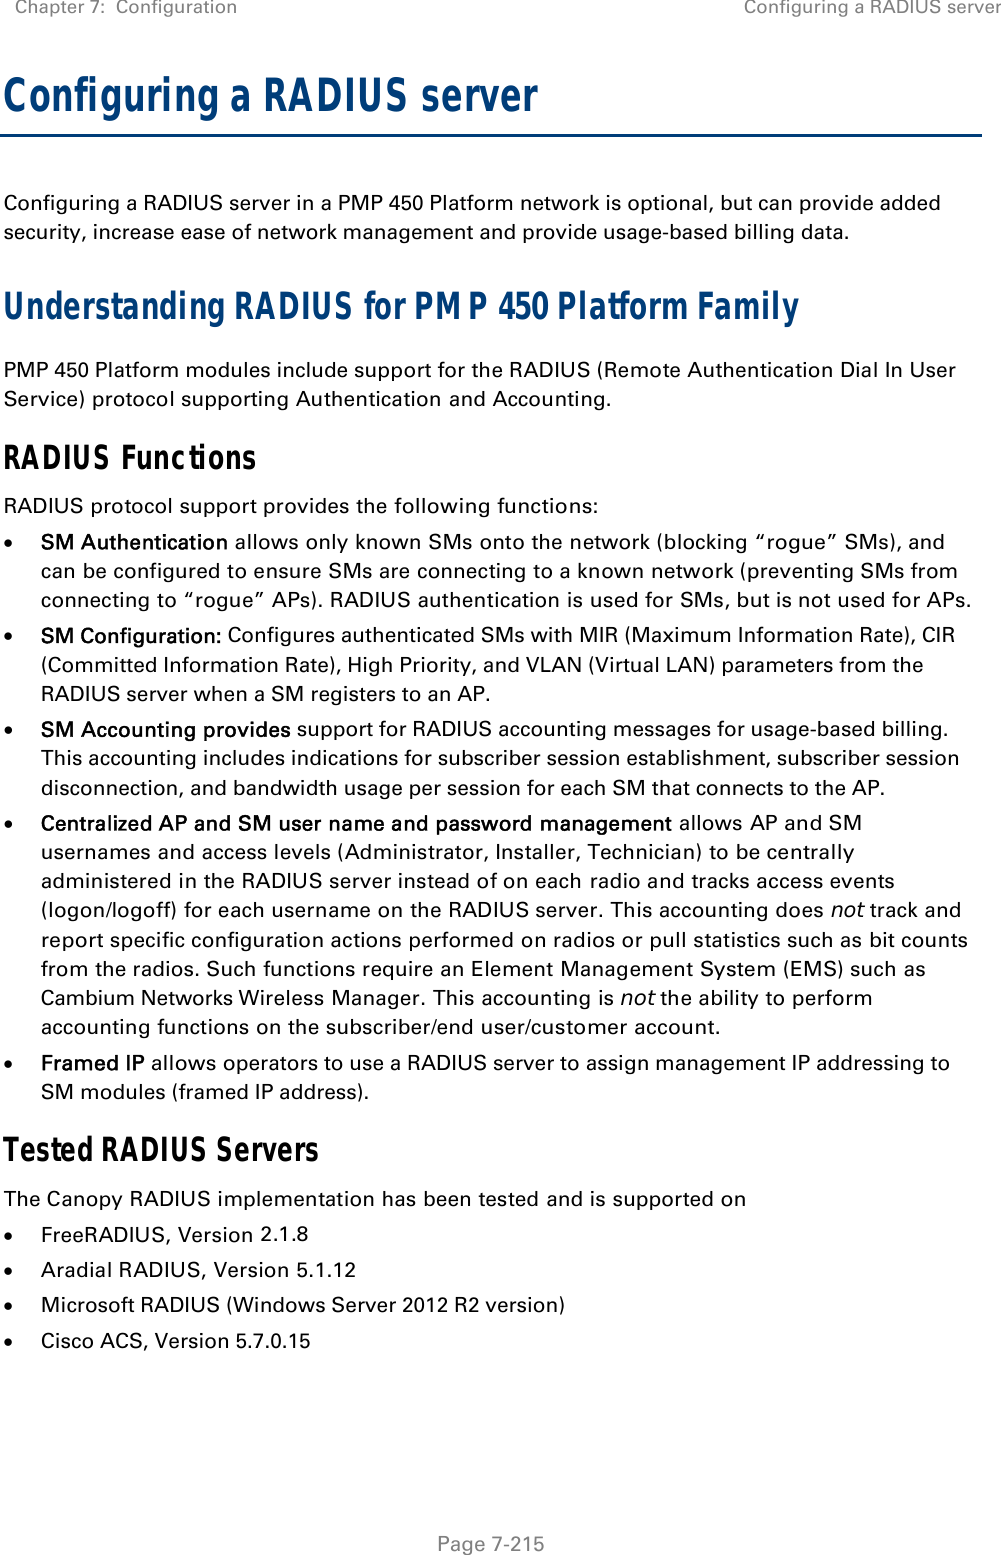 Chapter 7:  Configuration  Configuring a RADIUS server   Page 7-215 Configuring a RADIUS server Configuring a RADIUS server in a PMP 450 Platform network is optional, but can provide added security, increase ease of network management and provide usage-based billing data. Understanding RADIUS for PMP 450 Platform Family PMP 450 Platform modules include support for the RADIUS (Remote Authentication Dial In User Service) protocol supporting Authentication and Accounting. RADIUS Functions RADIUS protocol support provides the following functions:  SM Authentication allows only known SMs onto the network (blocking “rogue” SMs), and can be configured to ensure SMs are connecting to a known network (preventing SMs from connecting to “rogue” APs). RADIUS authentication is used for SMs, but is not used for APs.  SM Configuration: Configures authenticated SMs with MIR (Maximum Information Rate), CIR (Committed Information Rate), High Priority, and VLAN (Virtual LAN) parameters from the RADIUS server when a SM registers to an AP.  SM Accounting provides support for RADIUS accounting messages for usage-based billing. This accounting includes indications for subscriber session establishment, subscriber session disconnection, and bandwidth usage per session for each SM that connects to the AP.   Centralized AP and SM user name and password management allows AP and SM usernames and access levels (Administrator, Installer, Technician) to be centrally administered in the RADIUS server instead of on each radio and tracks access events (logon/logoff) for each username on the RADIUS server. This accounting does not track and report specific configuration actions performed on radios or pull statistics such as bit counts from the radios. Such functions require an Element Management System (EMS) such as Cambium Networks Wireless Manager. This accounting is not the ability to perform accounting functions on the subscriber/end user/customer account.  Framed IP allows operators to use a RADIUS server to assign management IP addressing to SM modules (framed IP address). Tested RADIUS Servers The Canopy RADIUS implementation has been tested and is supported on  FreeRADIUS, Version 2.1.8  Aradial RADIUS, Version 5.1.12  Microsoft RADIUS (Windows Server 2012 R2 version)   Cisco ACS, Version 5.7.0.15  